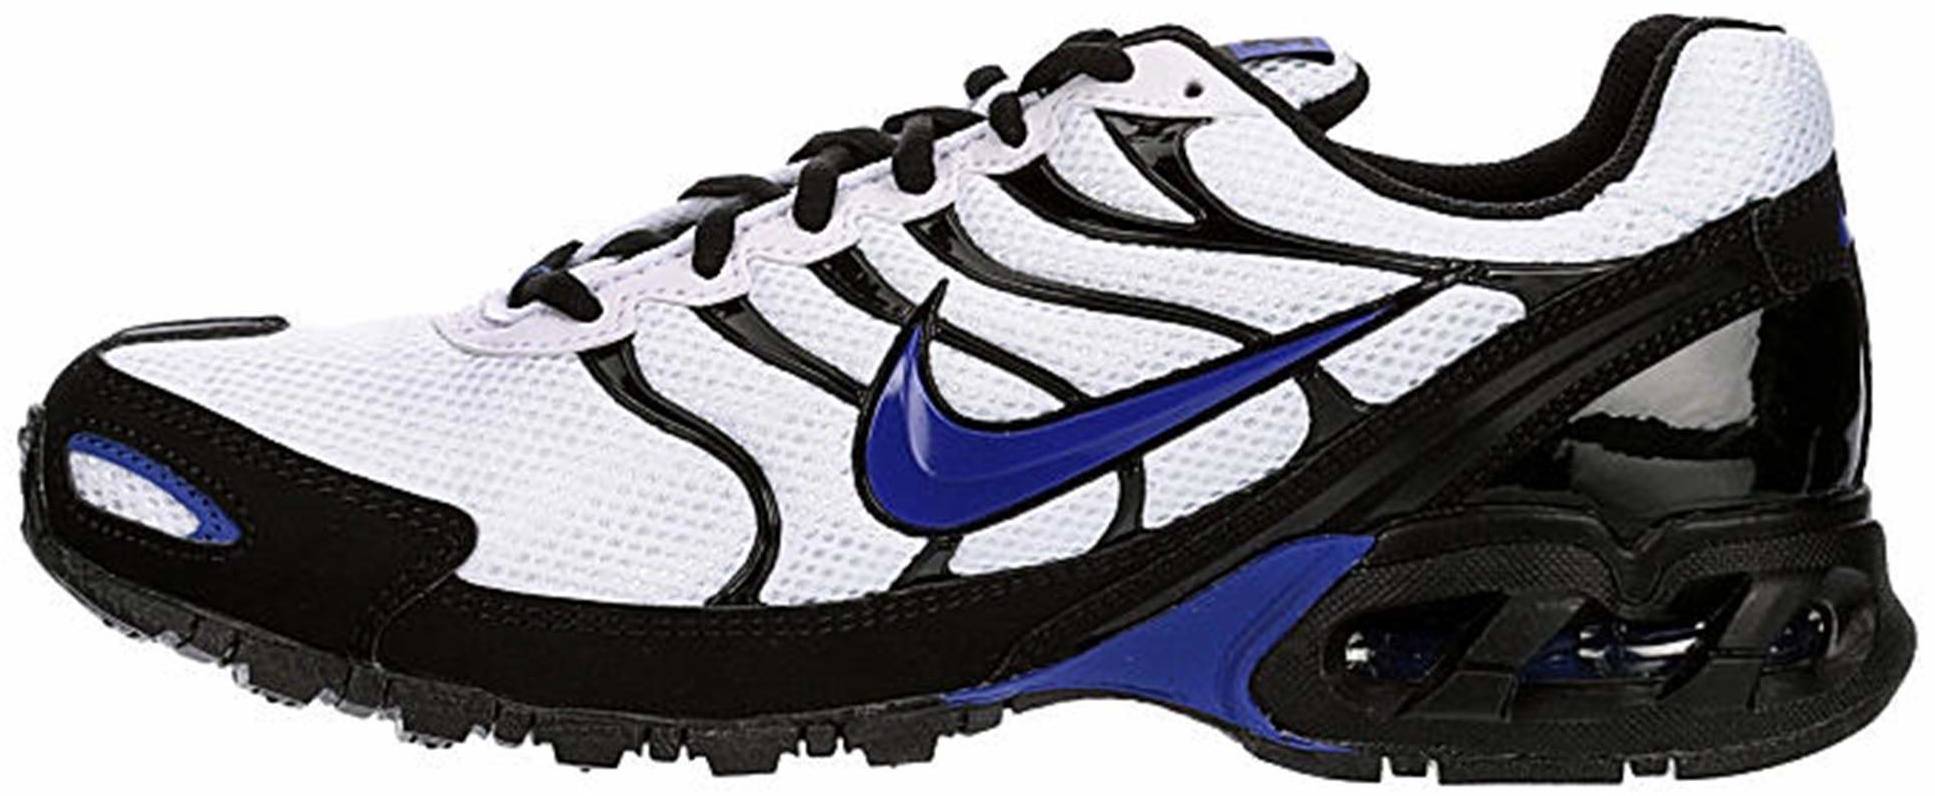 men's nike air max torch 4 running shoes